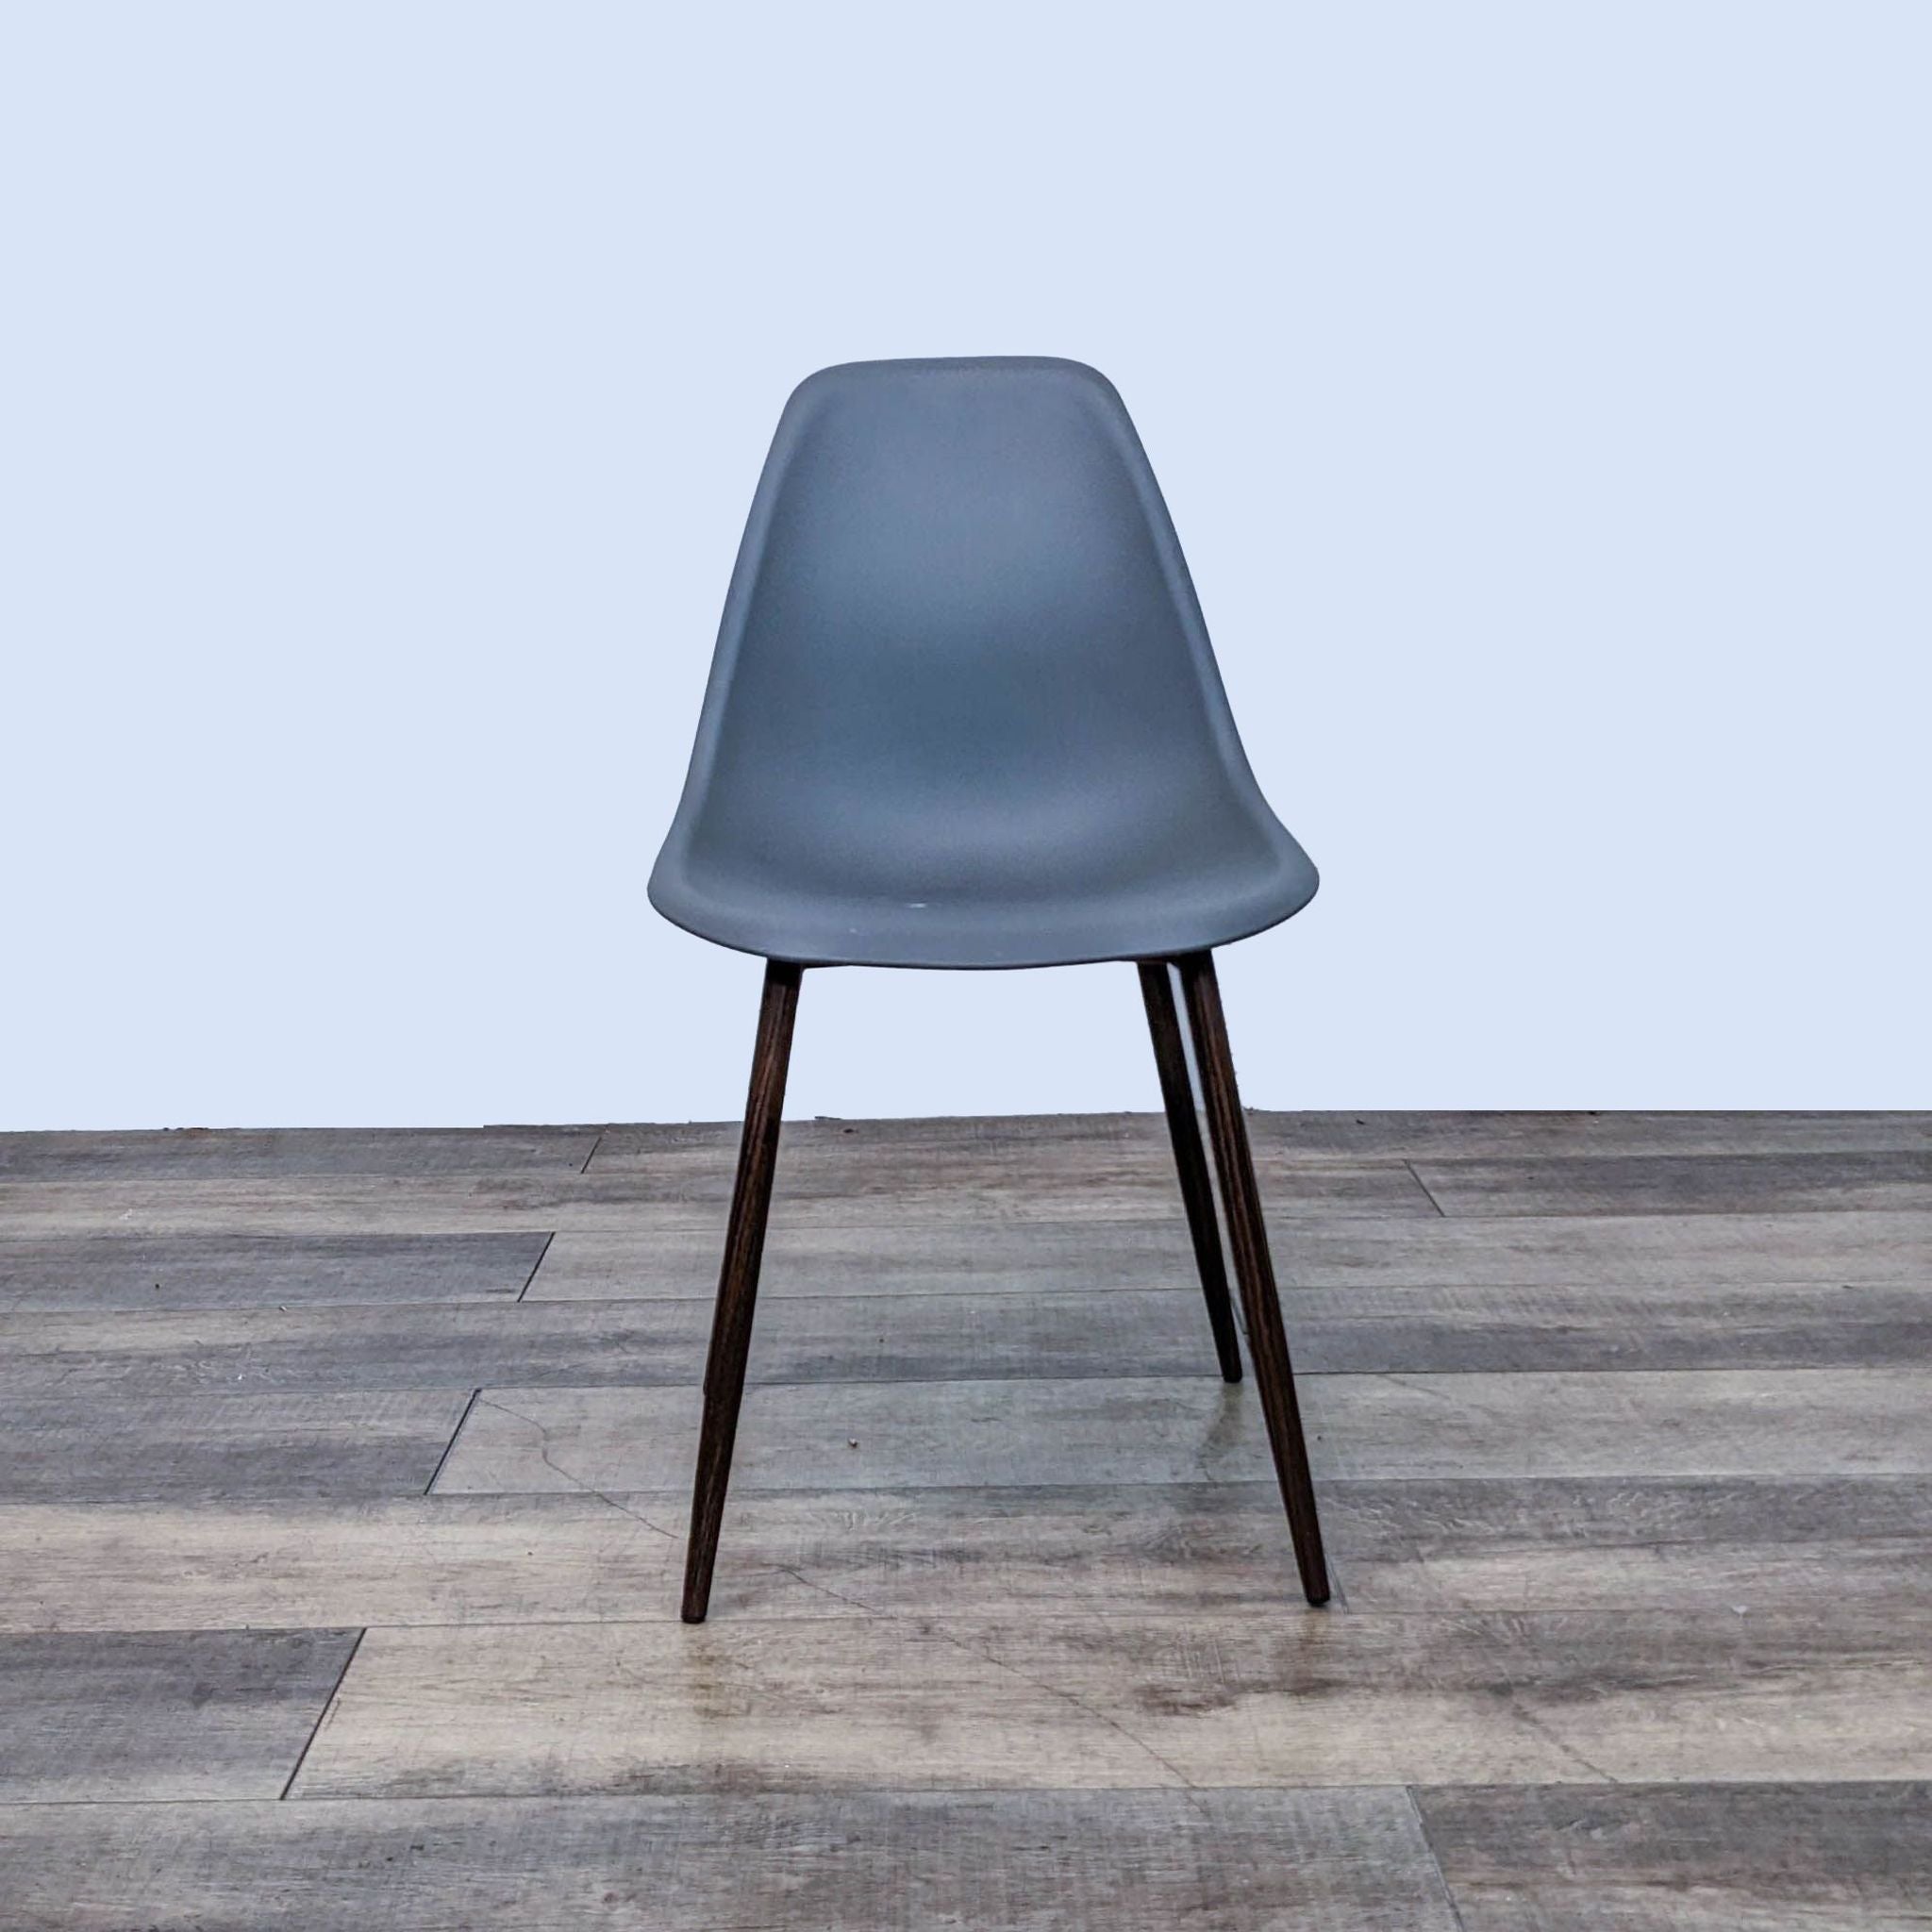 Reperch contemporary dining chair with gray sculpted plastic seat and wooden legs, shown from the front on wood flooring.